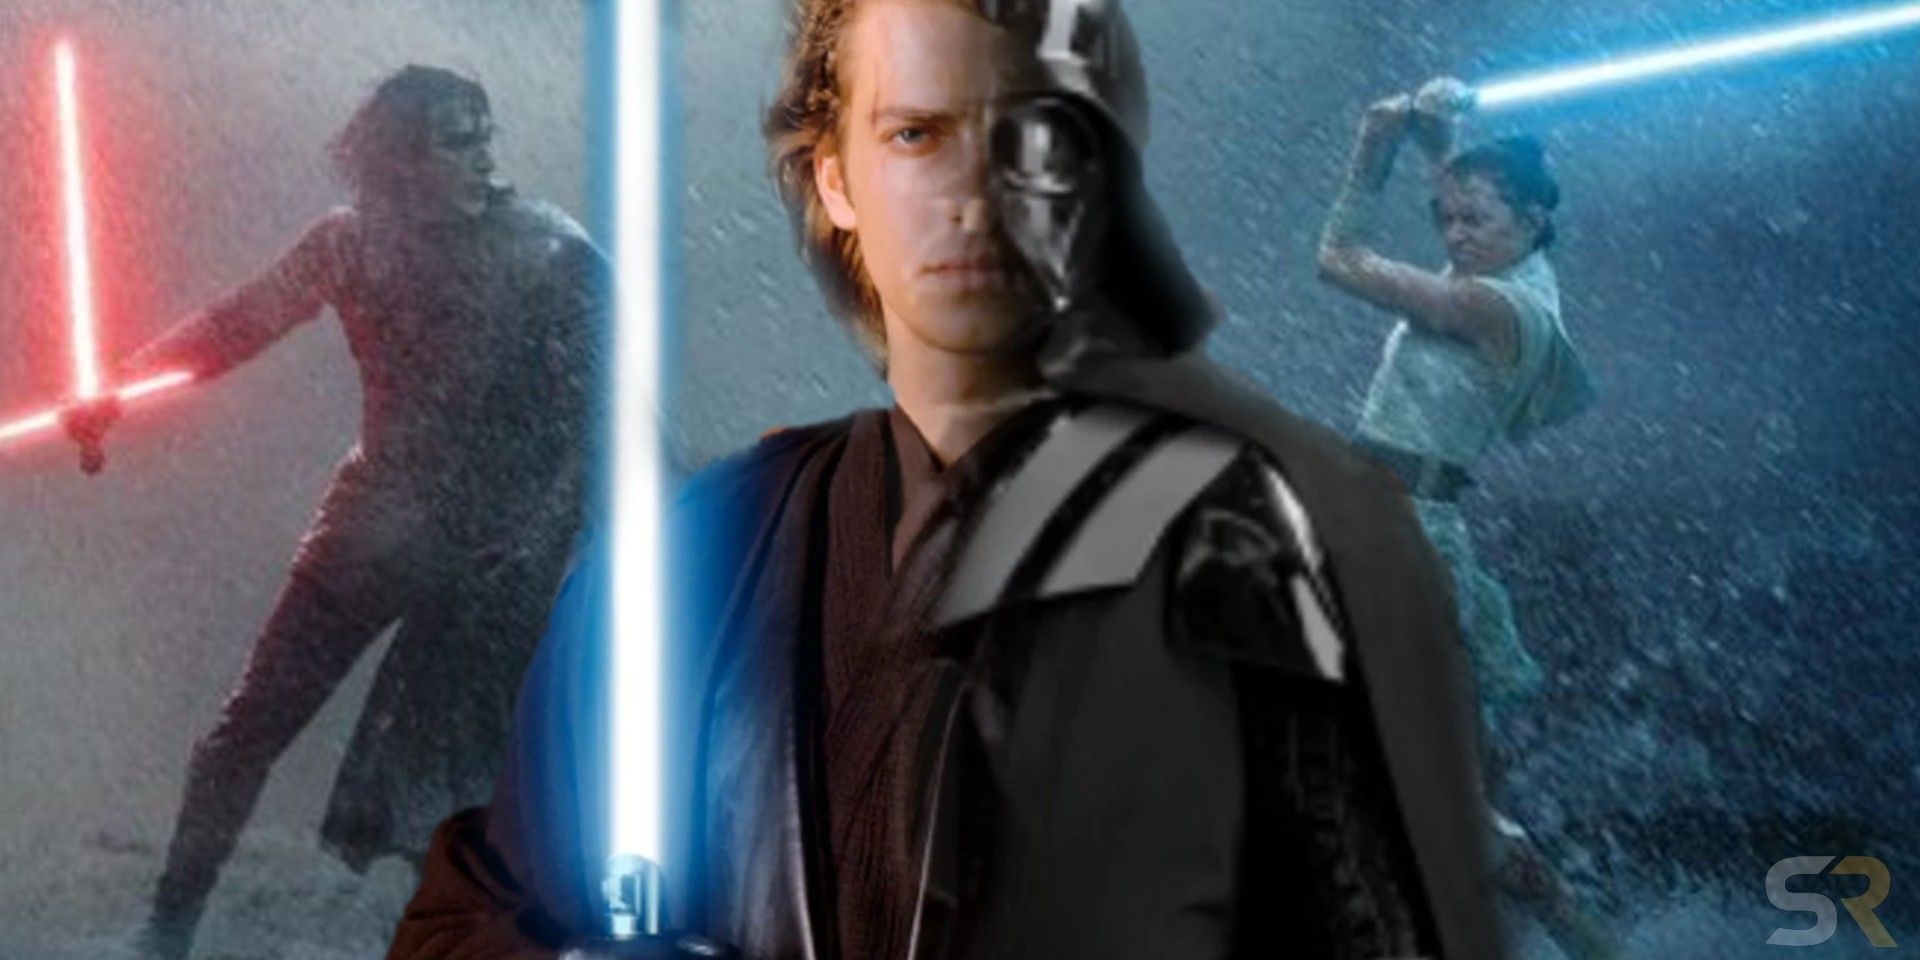 Did Anakin Skywalker/ Darth Vader Really Never Reach His Full Potential Due  To The Lost of His Flesh and Limbs or Just Simply Due To The Lack Of  Confidence? : r/StarWars